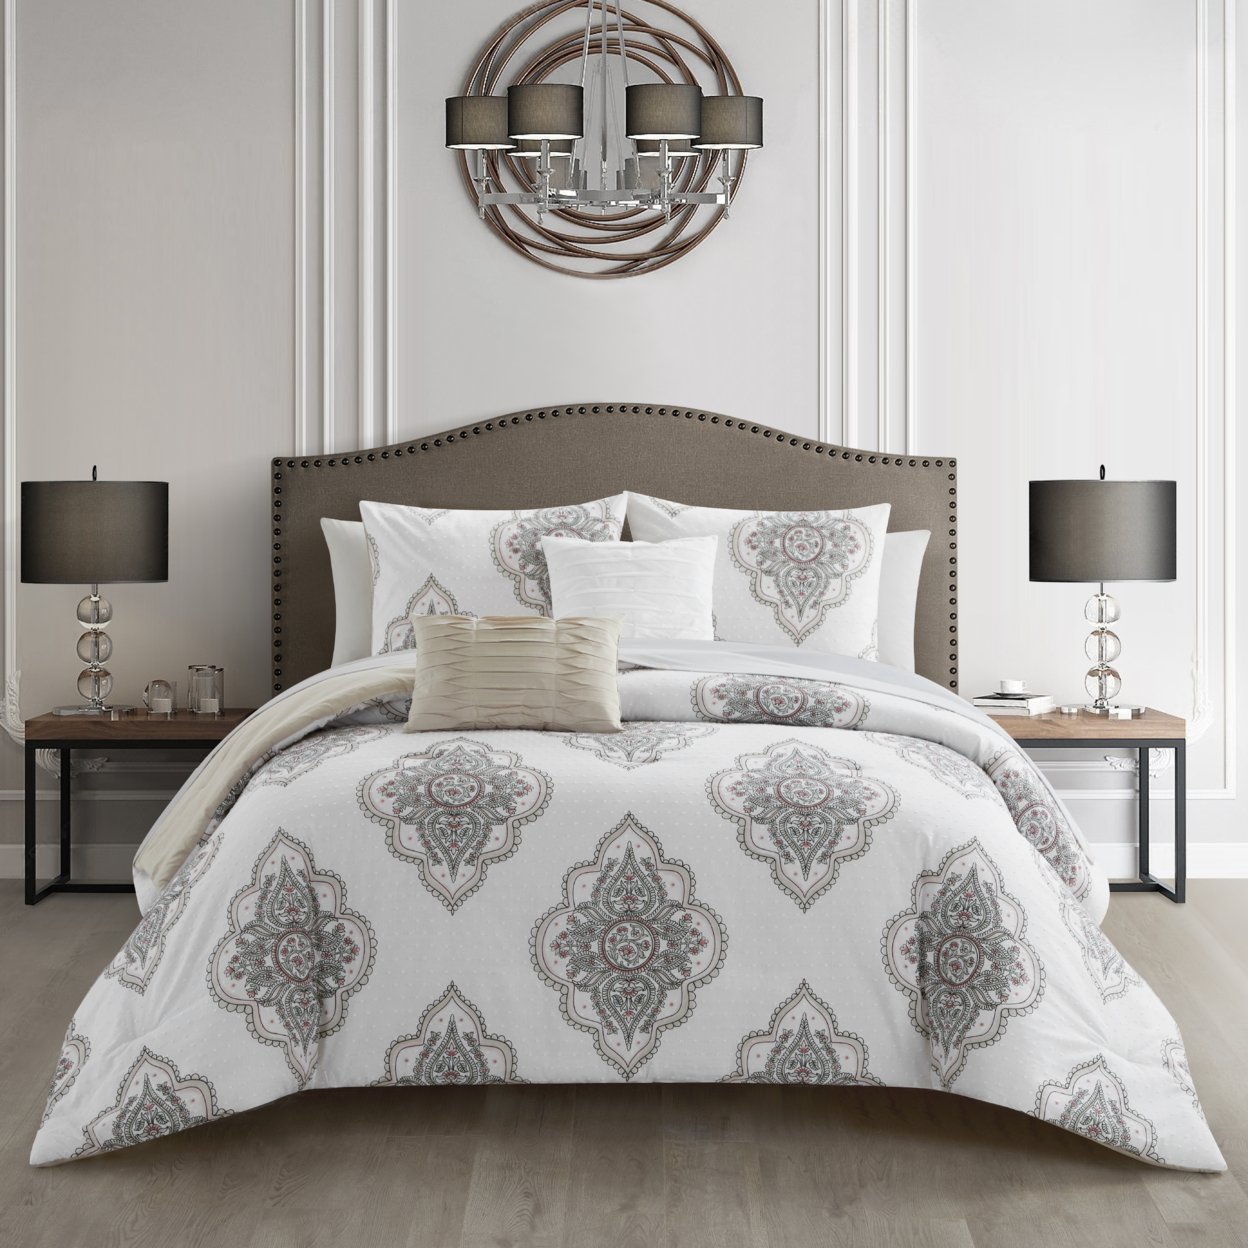 Chic Home Paacey 5 or 9 Piece Cotton Jacquard Comforter Set Medallion Embroidered Bedding